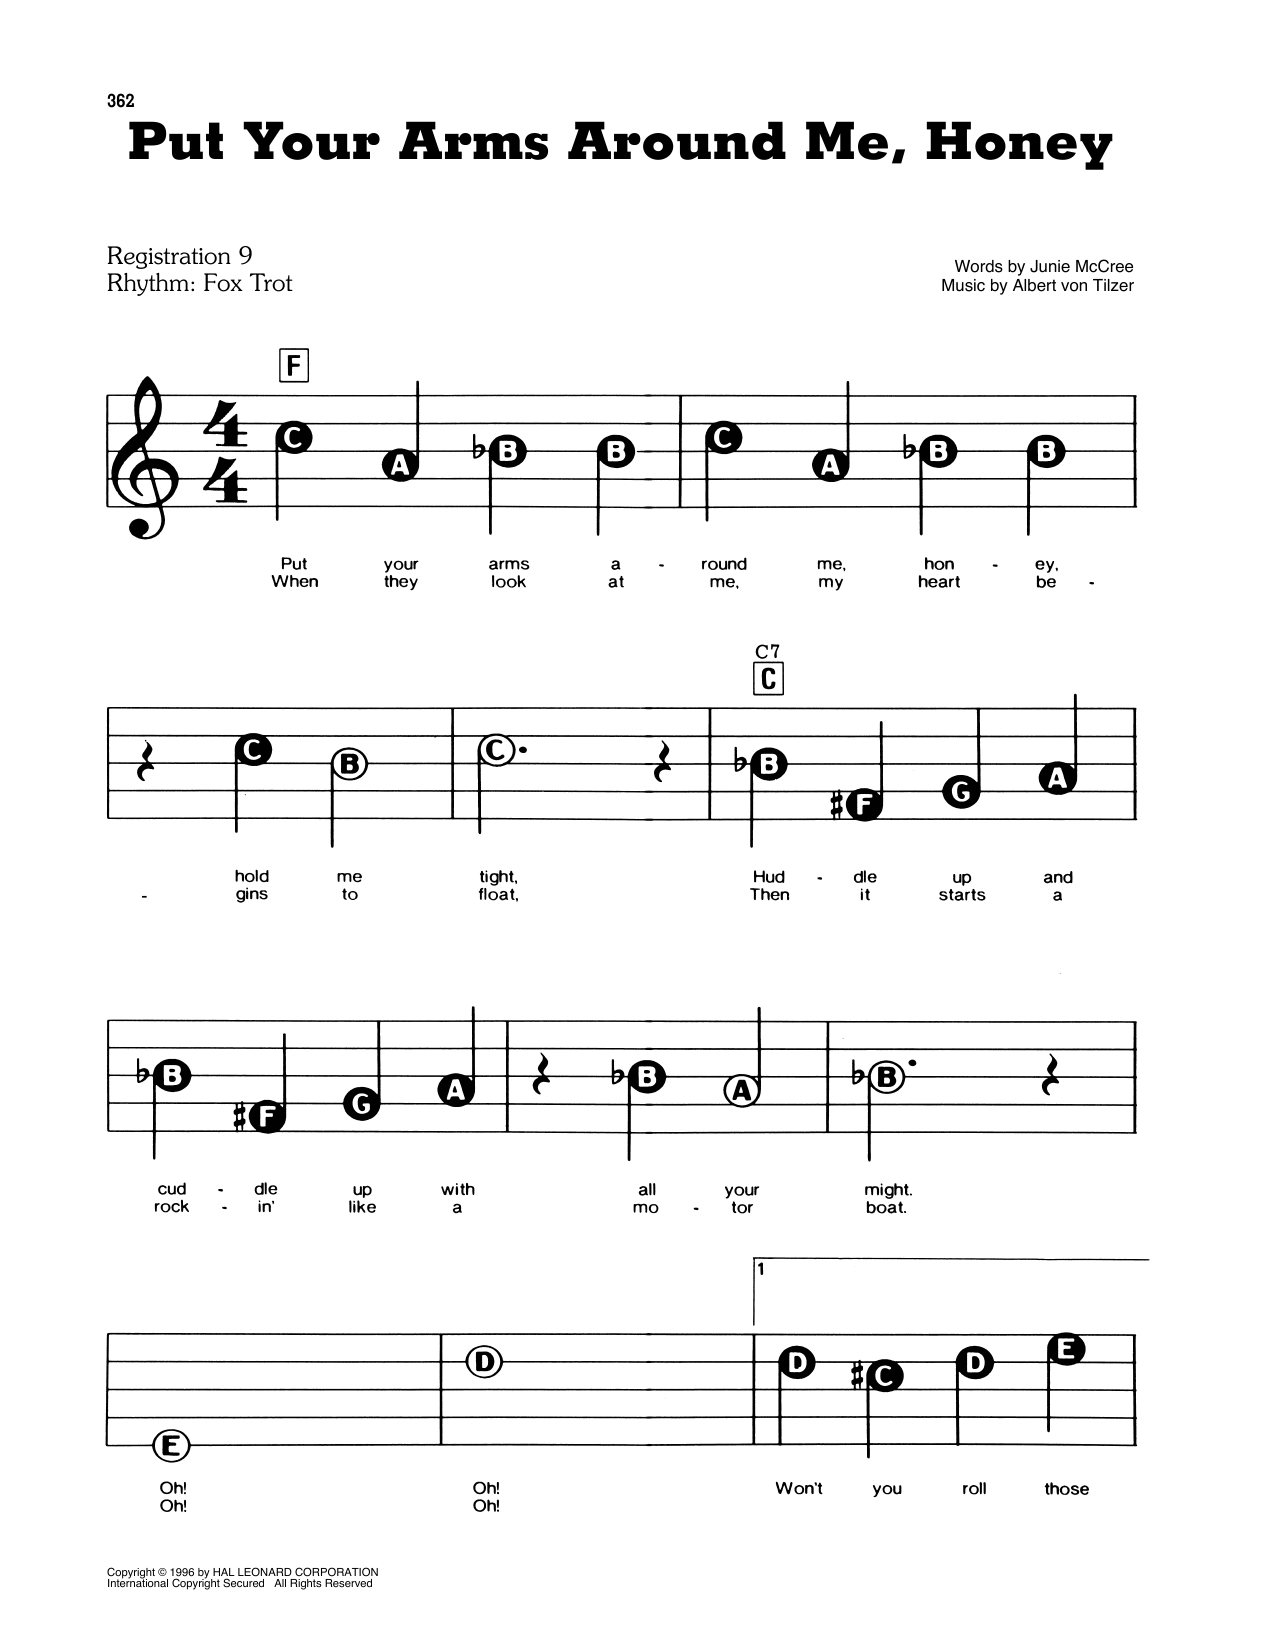 Junie McCree and Albert von Tilzer Put Your Arms Around Me, Honey sheet music preview music notes and score for E-Z Play Today including 2 page(s)